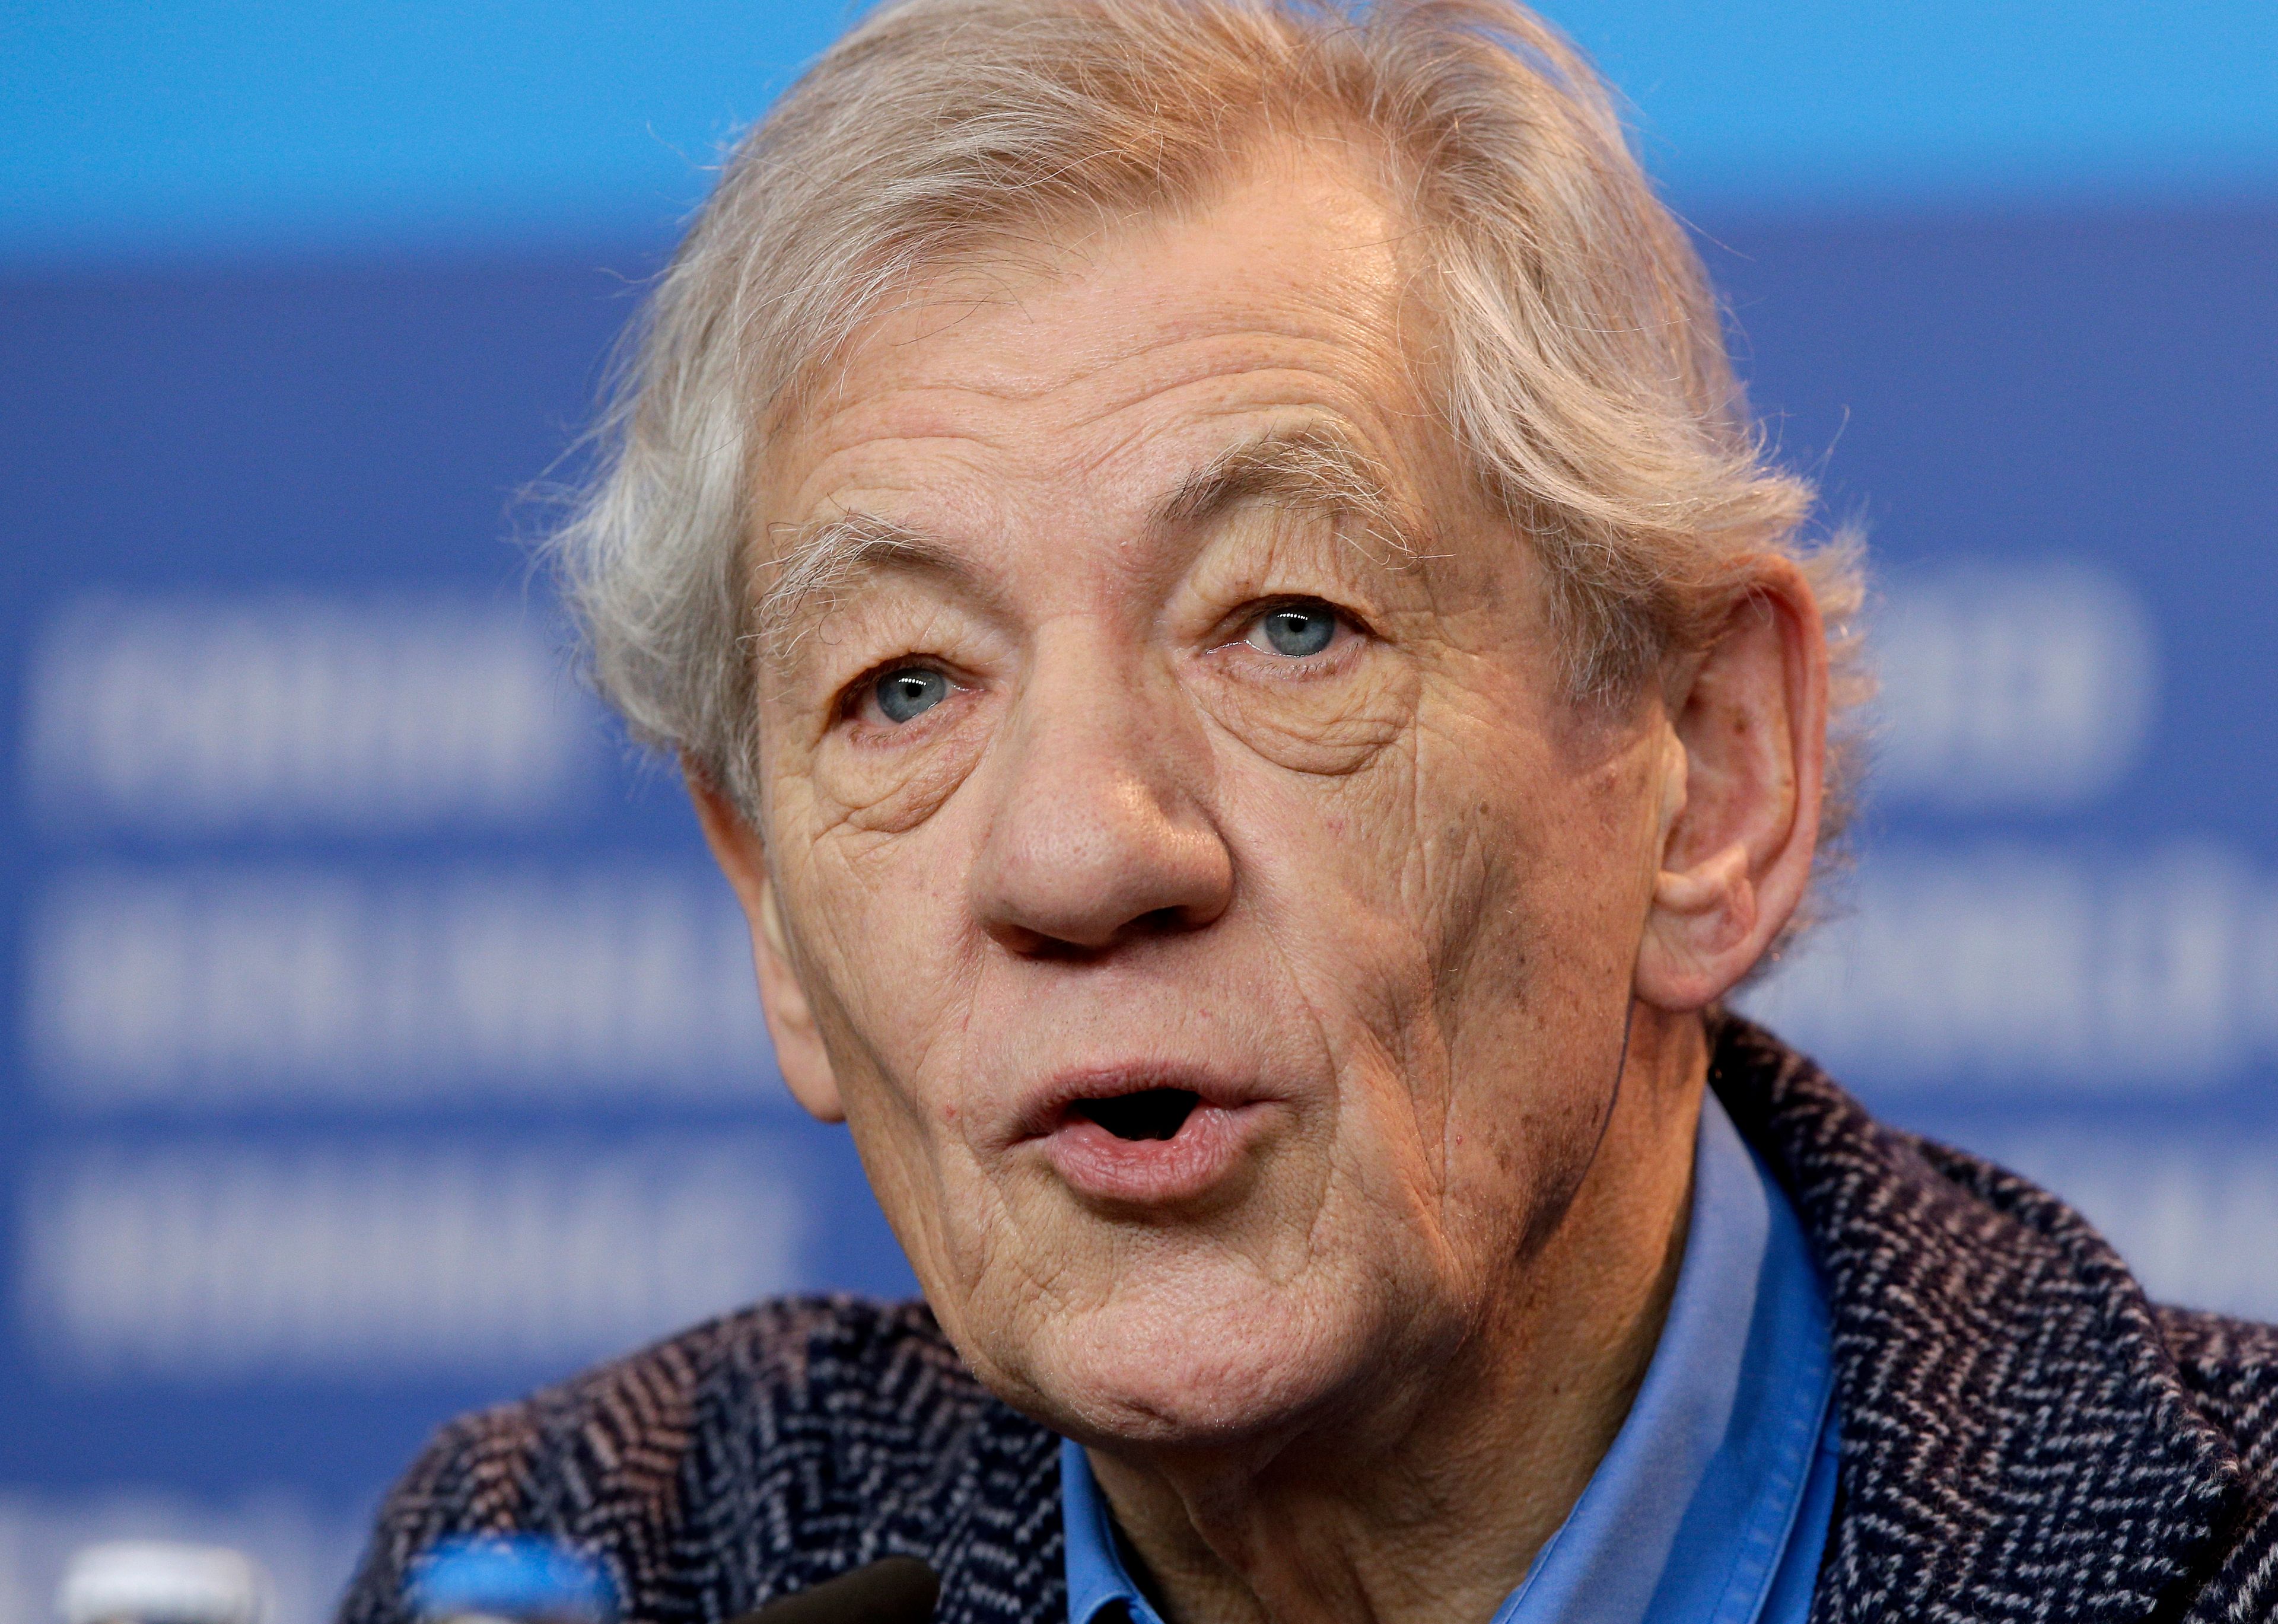 FILE - Actor Sir Ian McKellen speaks during the press conference for the film "Mr. Holmes" at the 2015 Berlinale Film Festival in Berlin, Germany, Sunday, Feb. 8, 2015. McKellen has been hospitalized Monday, June 17, 2024, after toppling off a London stage during a fight scene in a play. The 85-year-old actor known for playing Gandalf in the “Lord of the Rings” films and his many stage roles was playing John Falstaff in a production of Player Kings at the Noel Coward Theatre. (AP Photo/Michael Sohn, File)